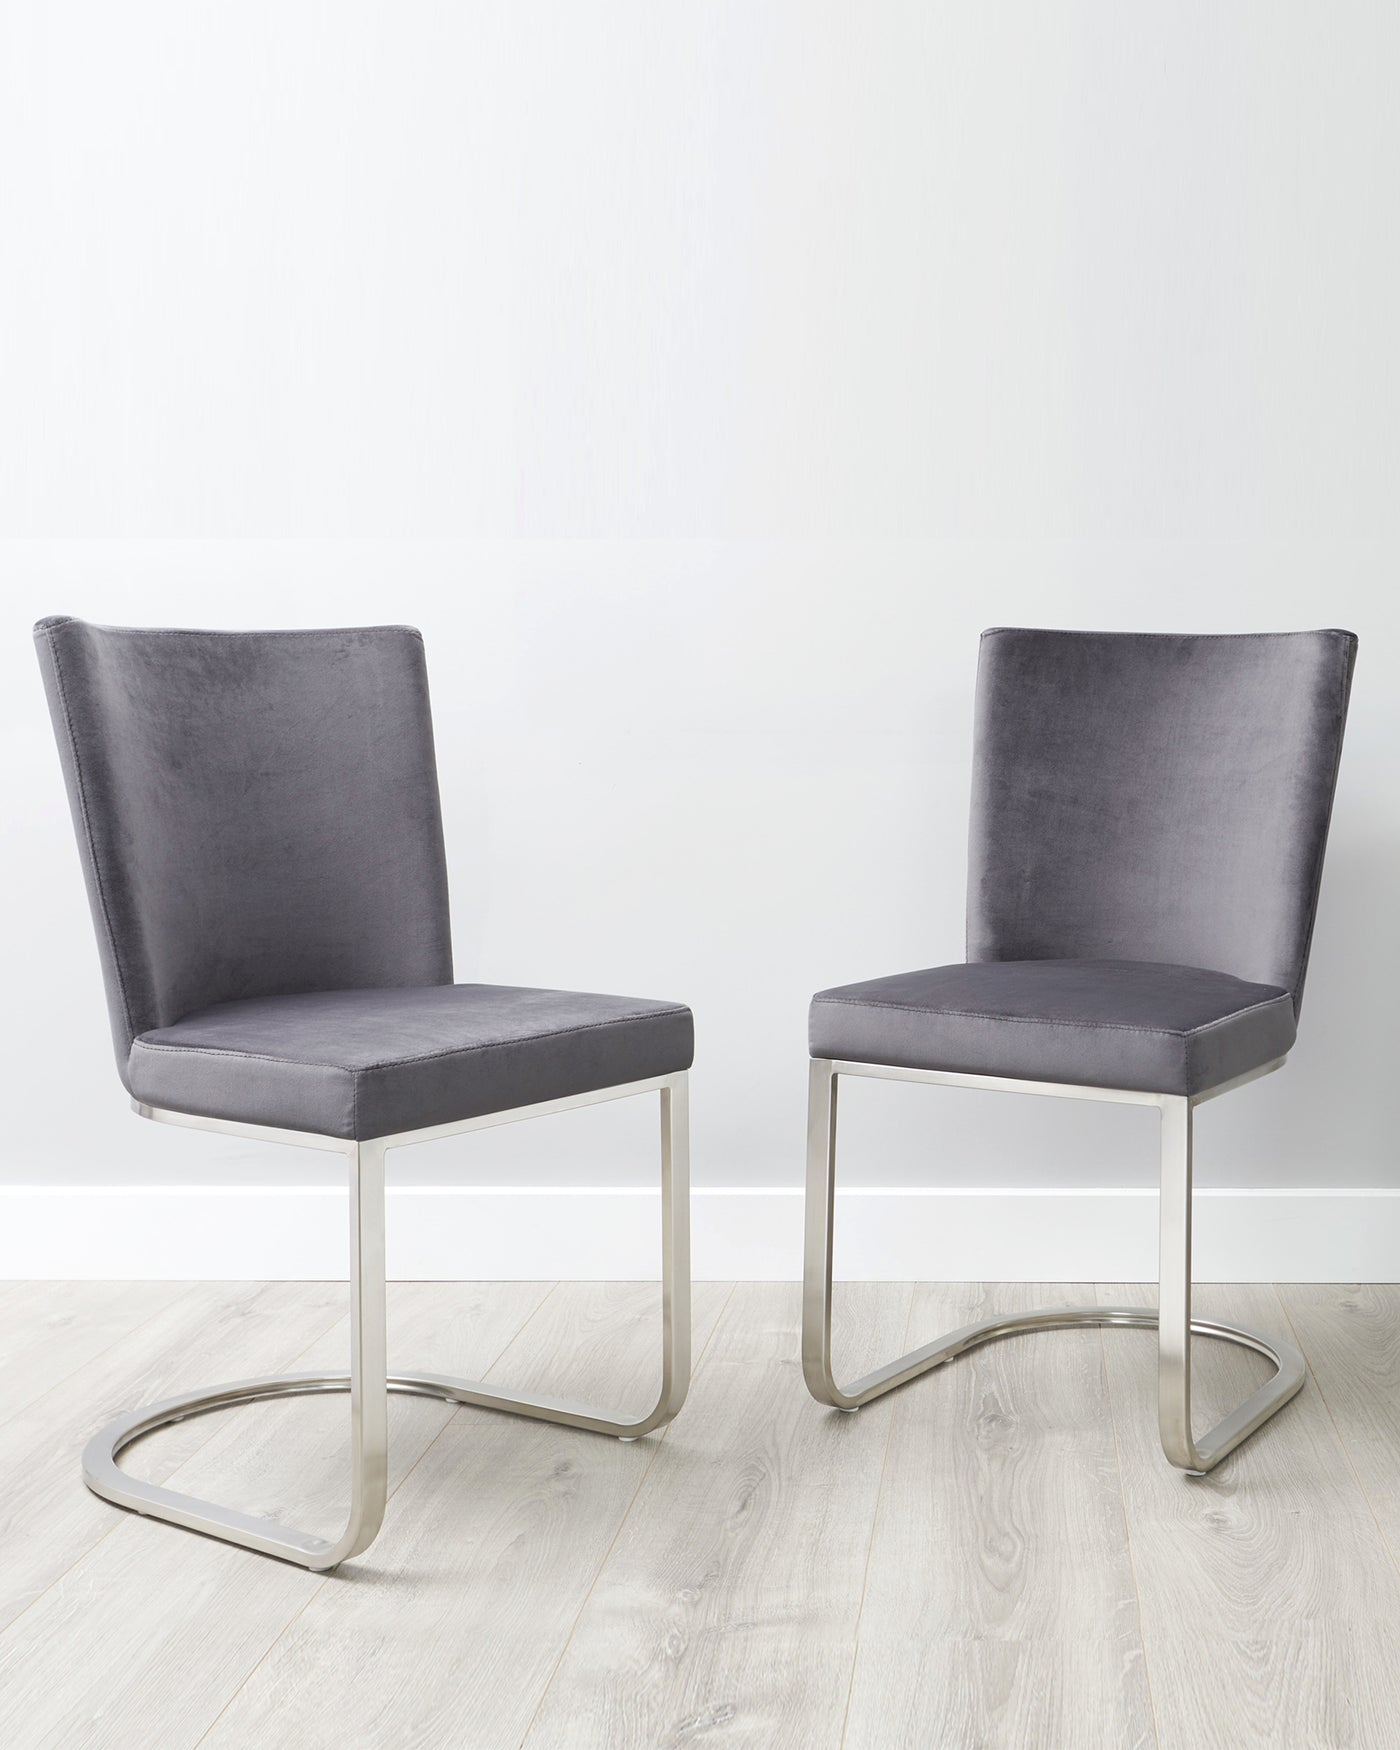 Two contemporary grey upholstered dining chairs with sleek silver metal cantilever bases.